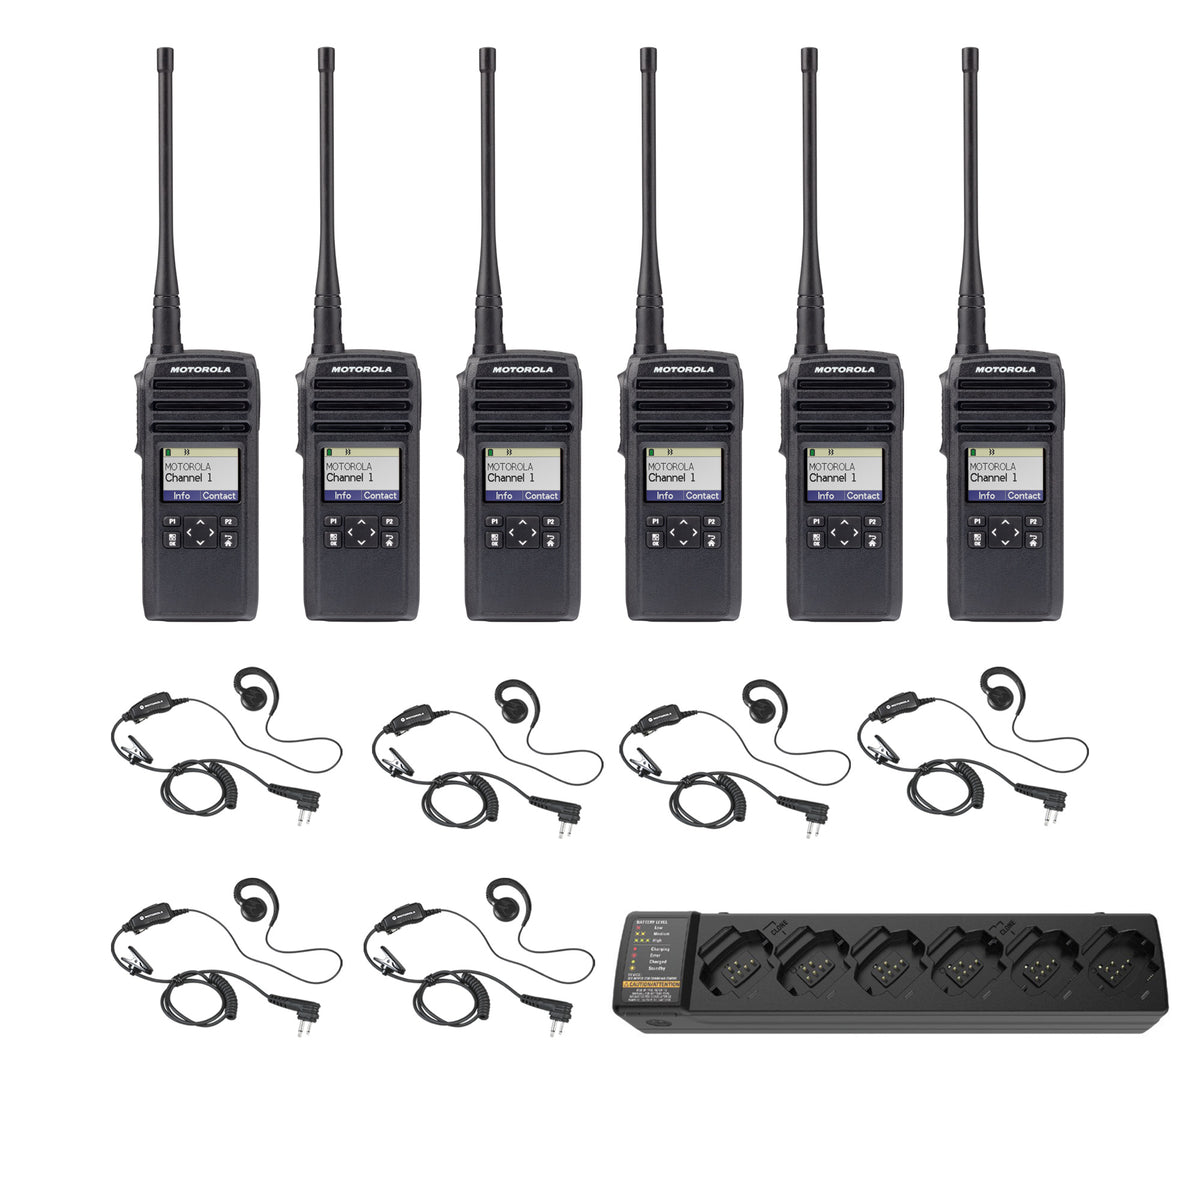 Motorola DTR700 Pack Bundle with Multi-Unit Charger and Headsets|  TwoWayRadioGear